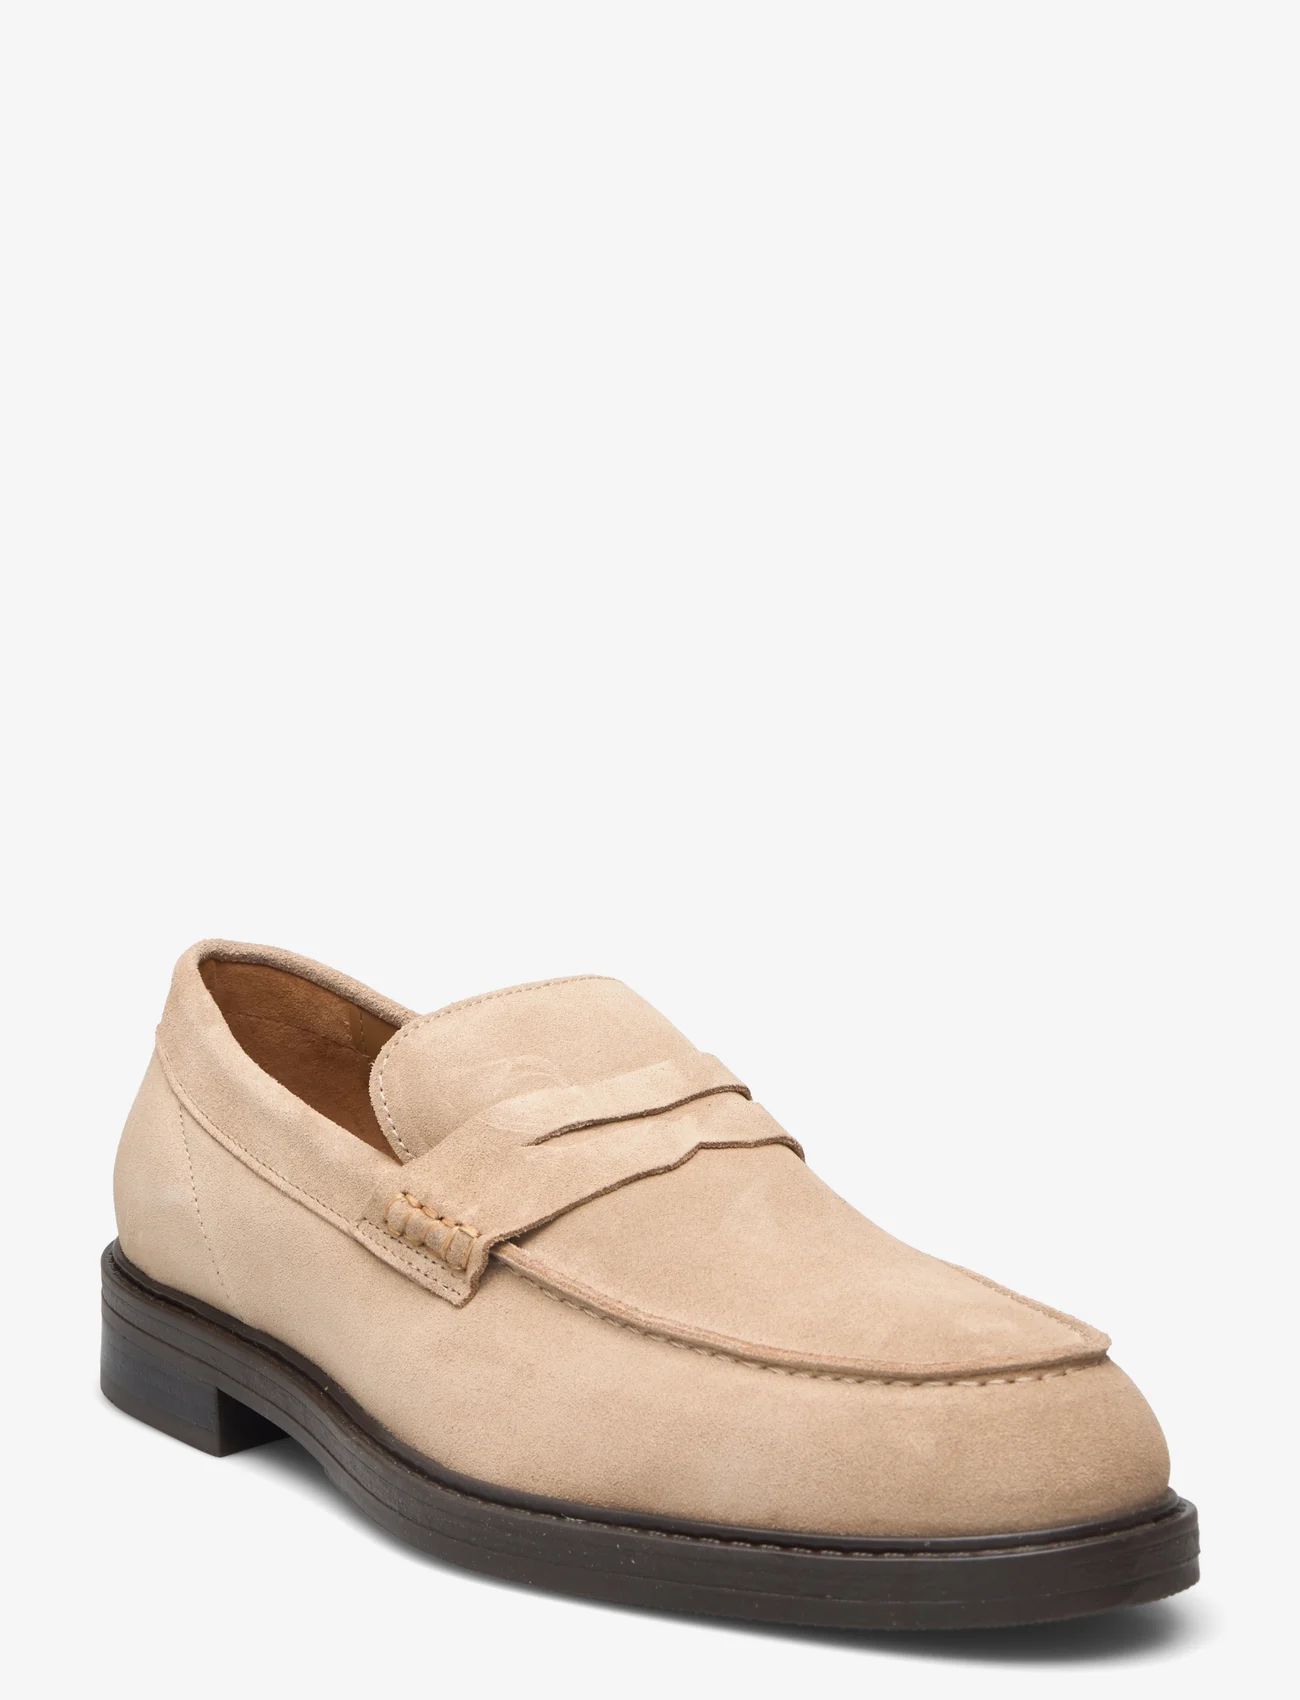 Selected Homme - SLHBLAKE SUEDE PENNY LOAFER - spring shoes - sand - 0